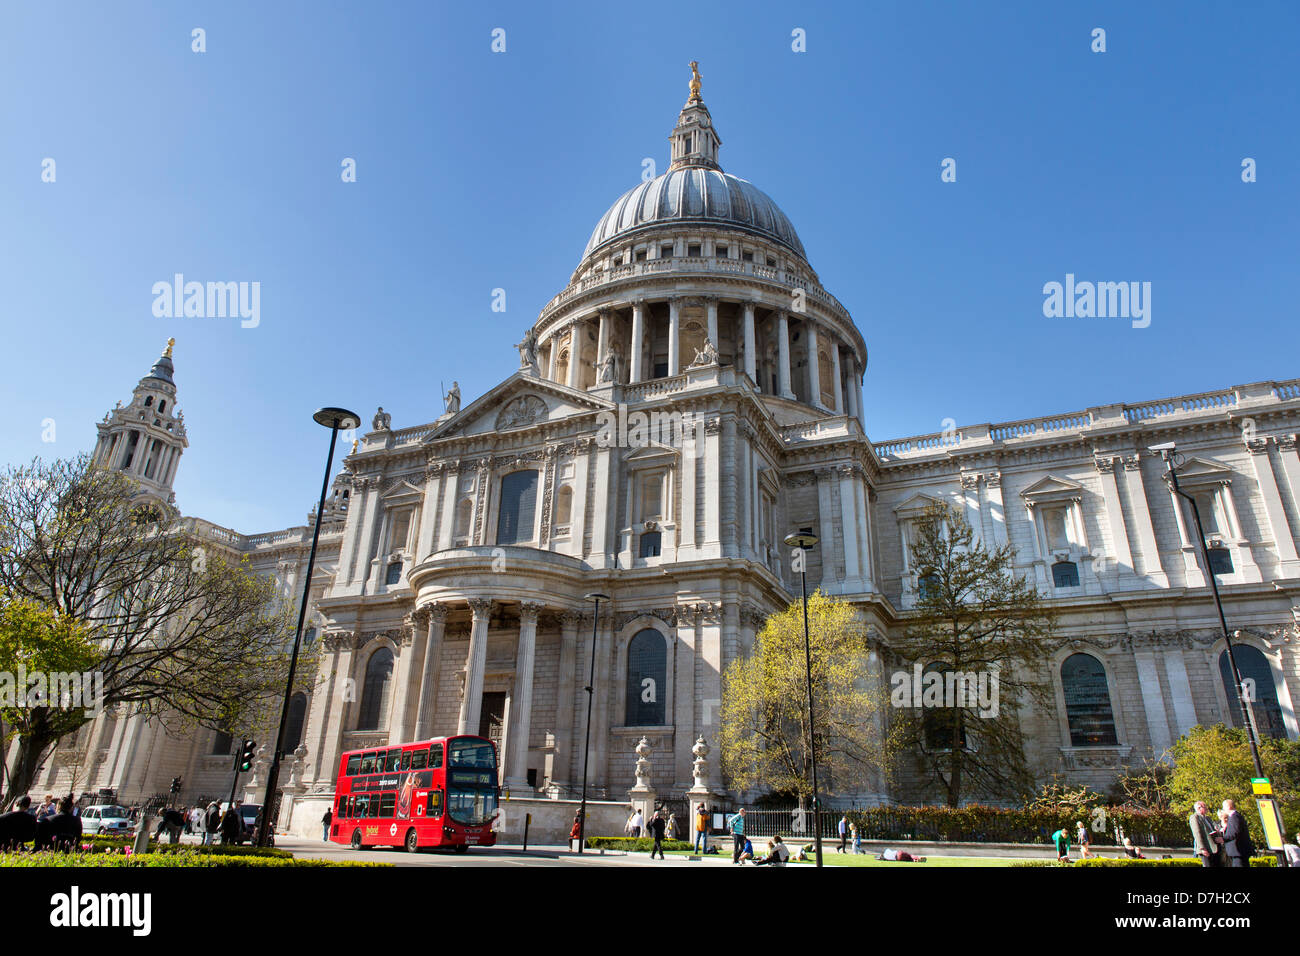 St. Pauls Cathedral in London. Stockfoto